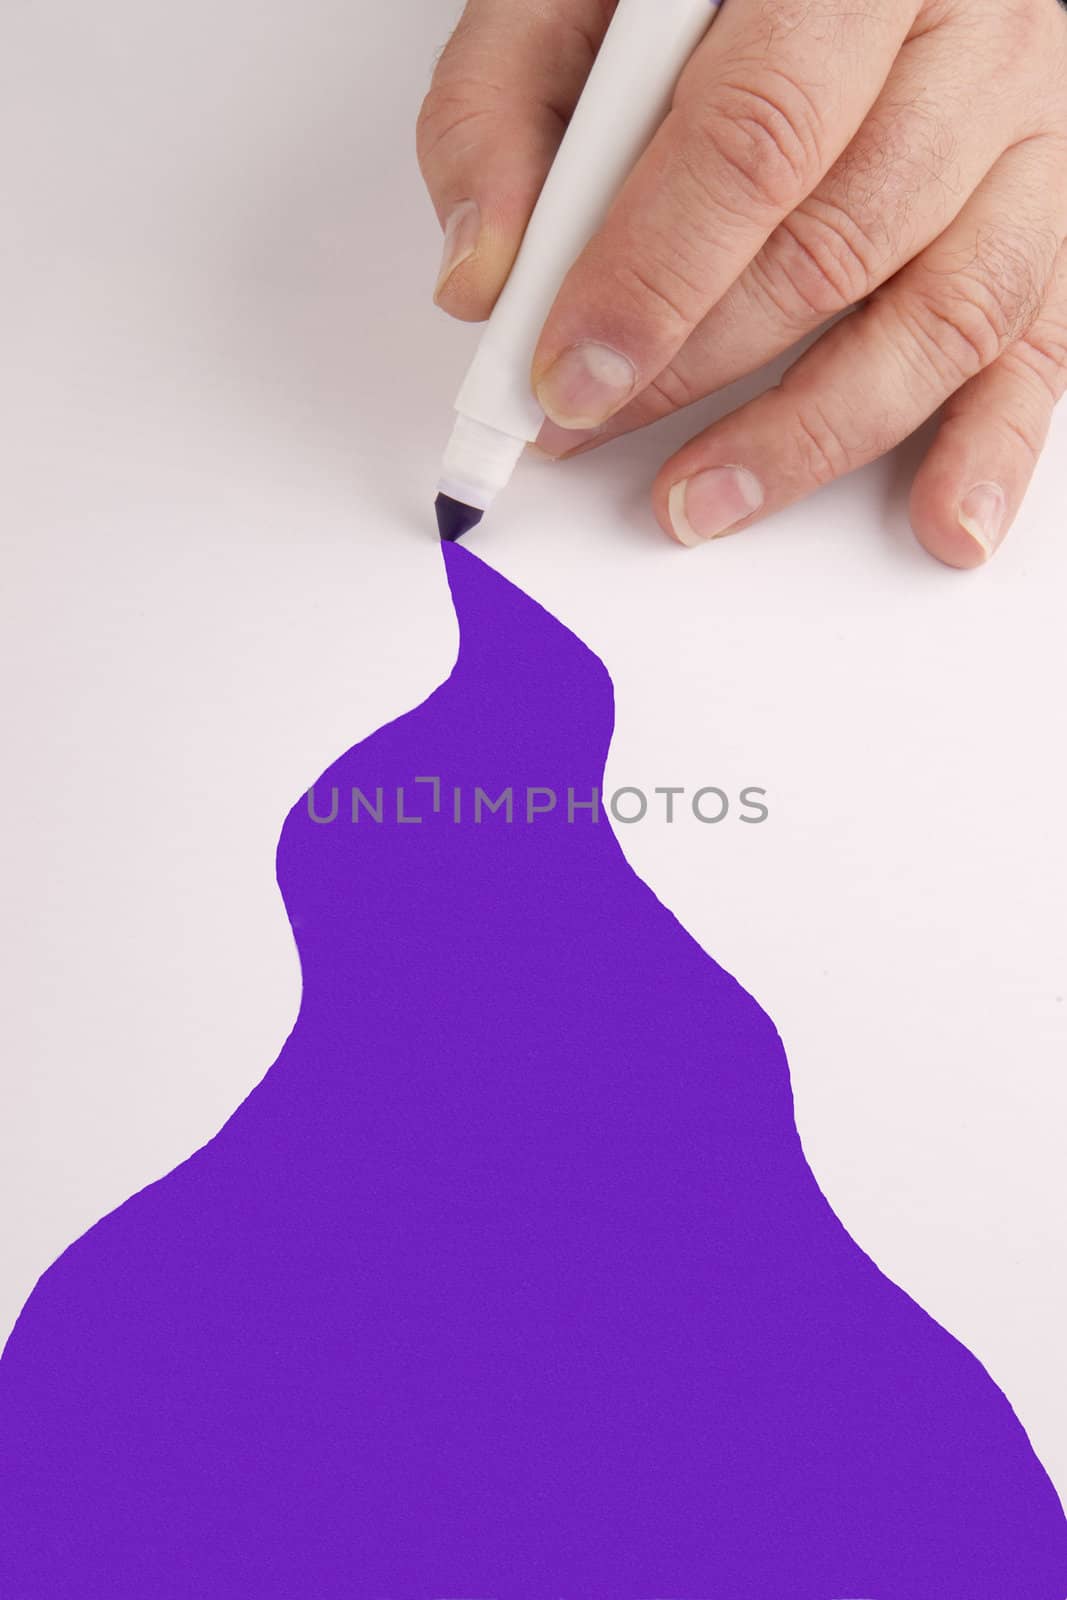 A marker is used to create a path of color on white paper